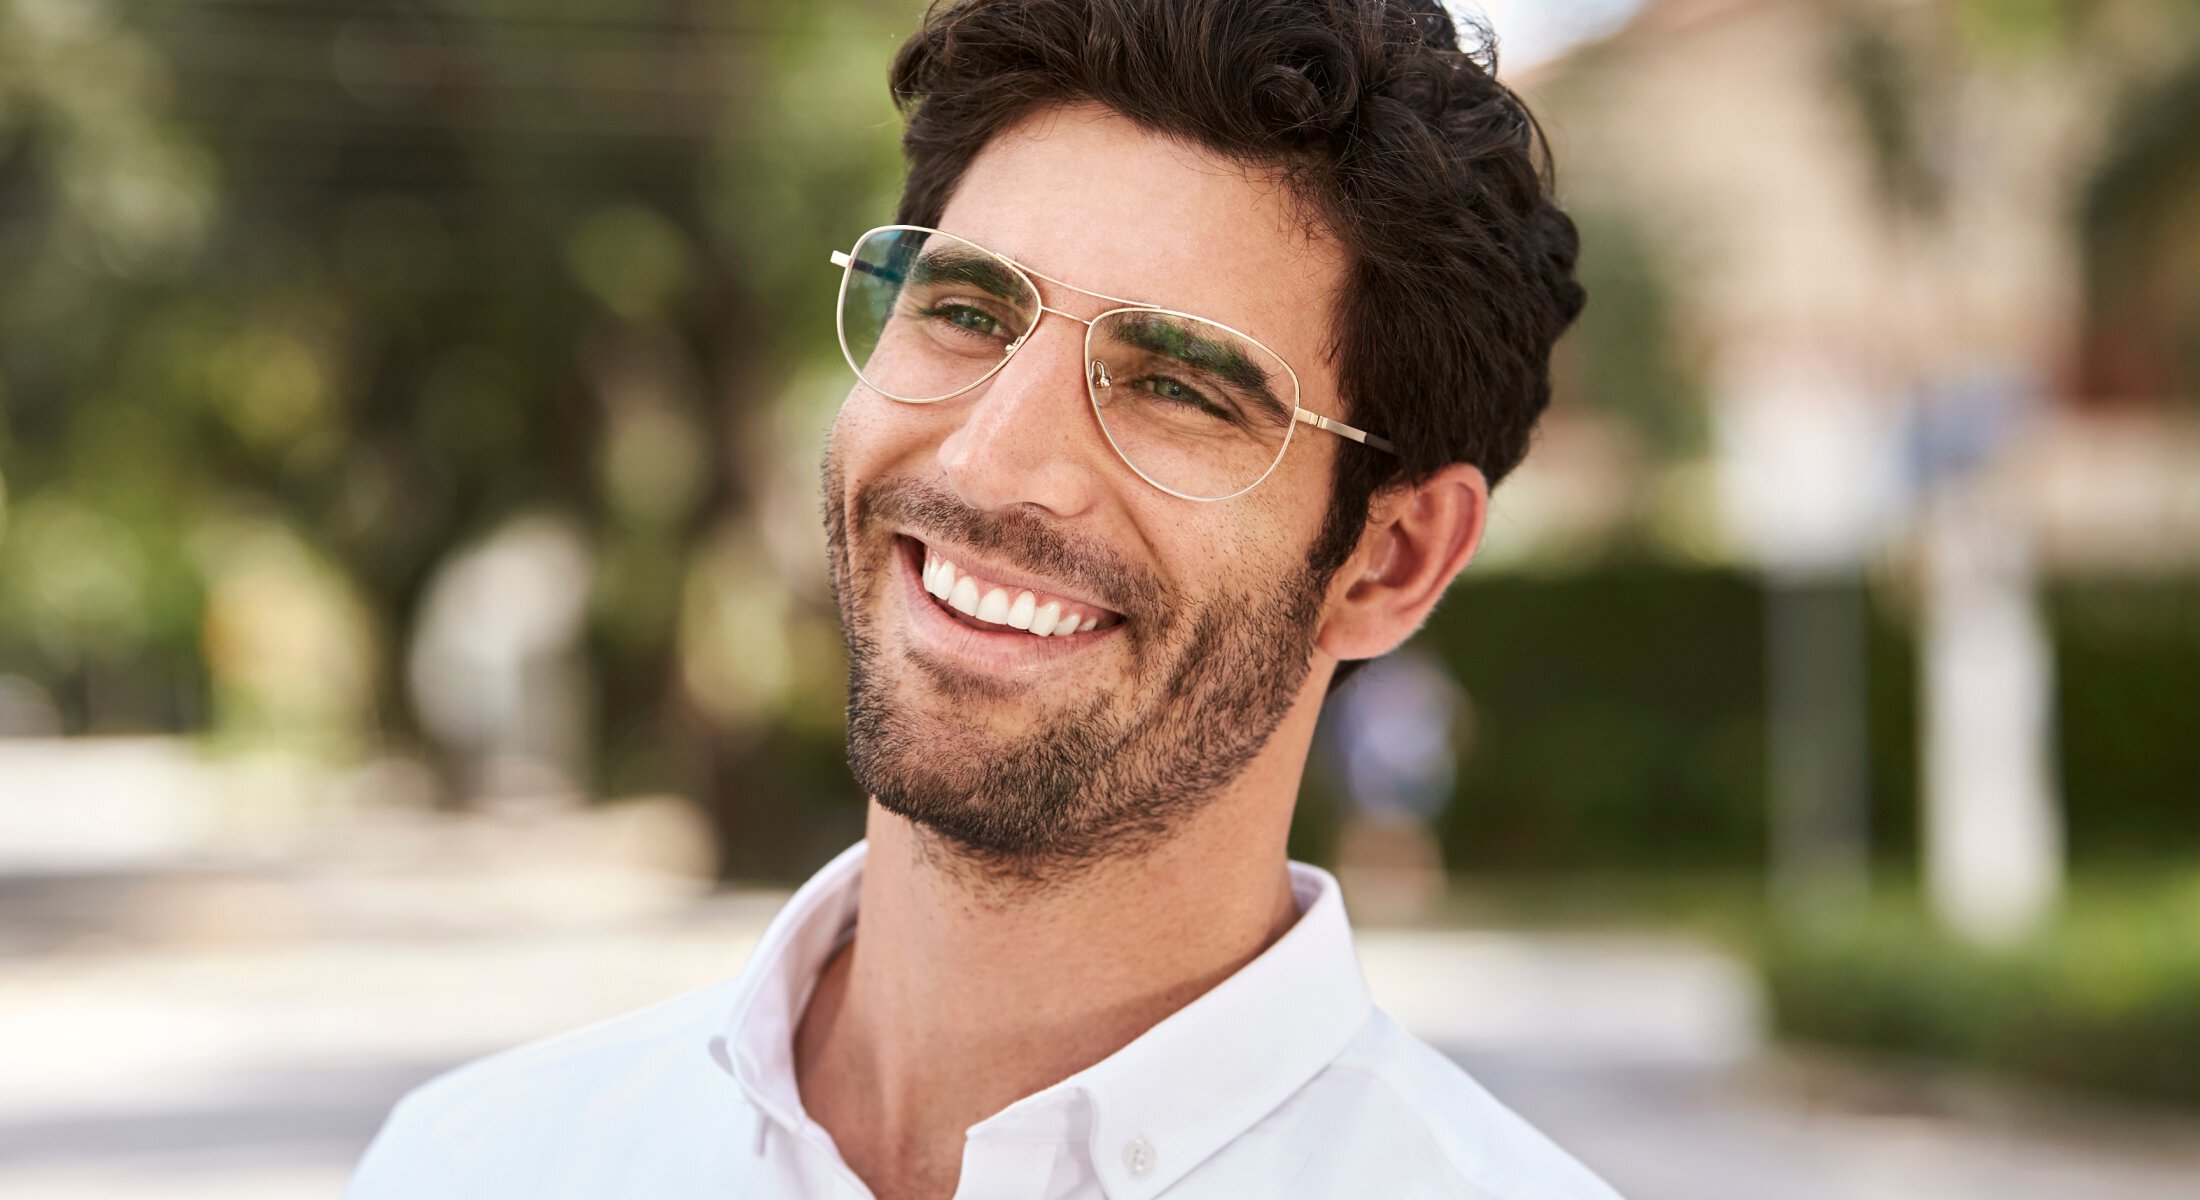 Sherman Oaks Cosmetic Dentistry patient Model with glasses